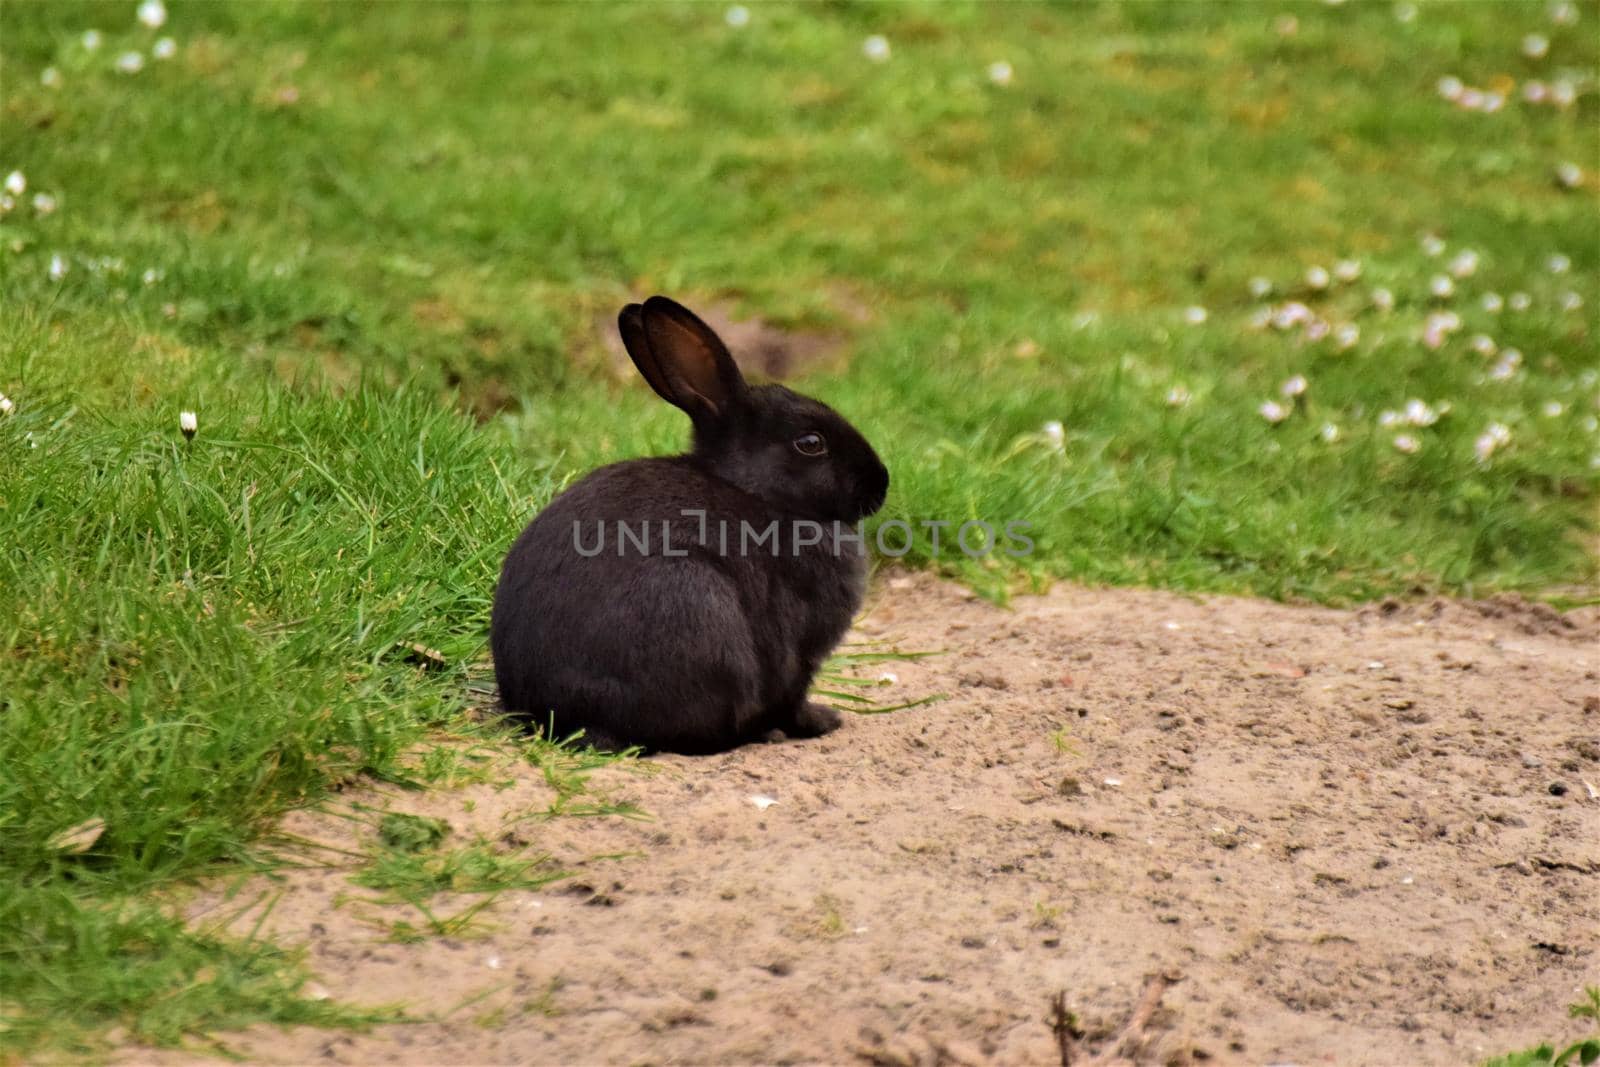 Black rabbit sitting on sand besides a green lawn with clover